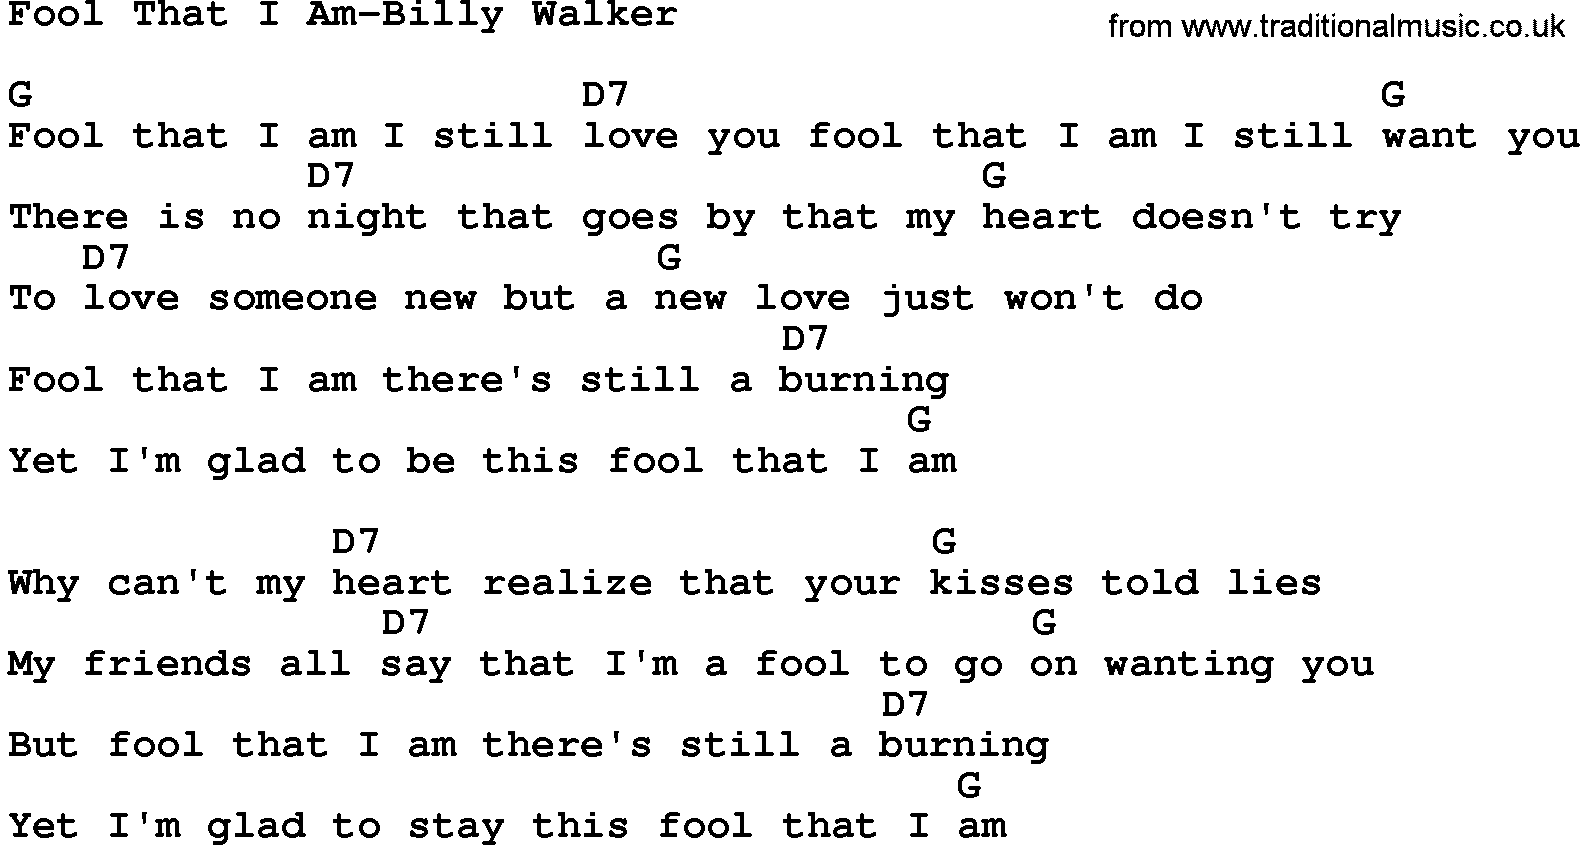 Country music song: Fool That I Am-Billy Walker lyrics and chords